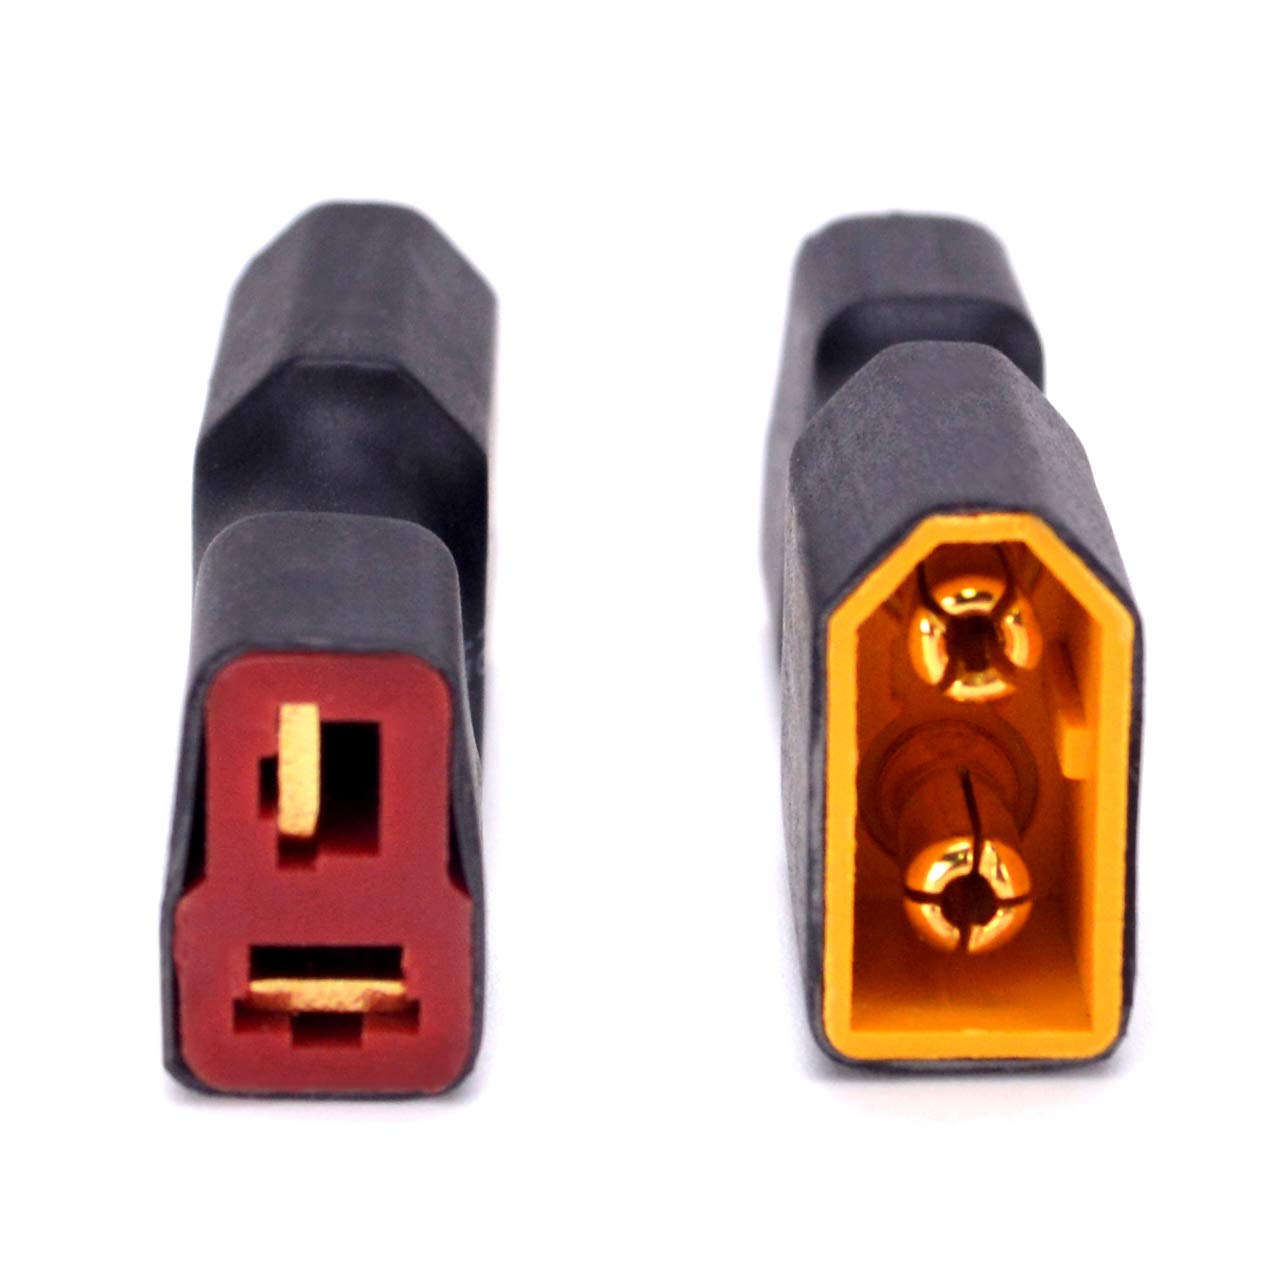 2X Male XT60 to Female Deans Type T plug RC Battery Adapter No Wire US SELLER 